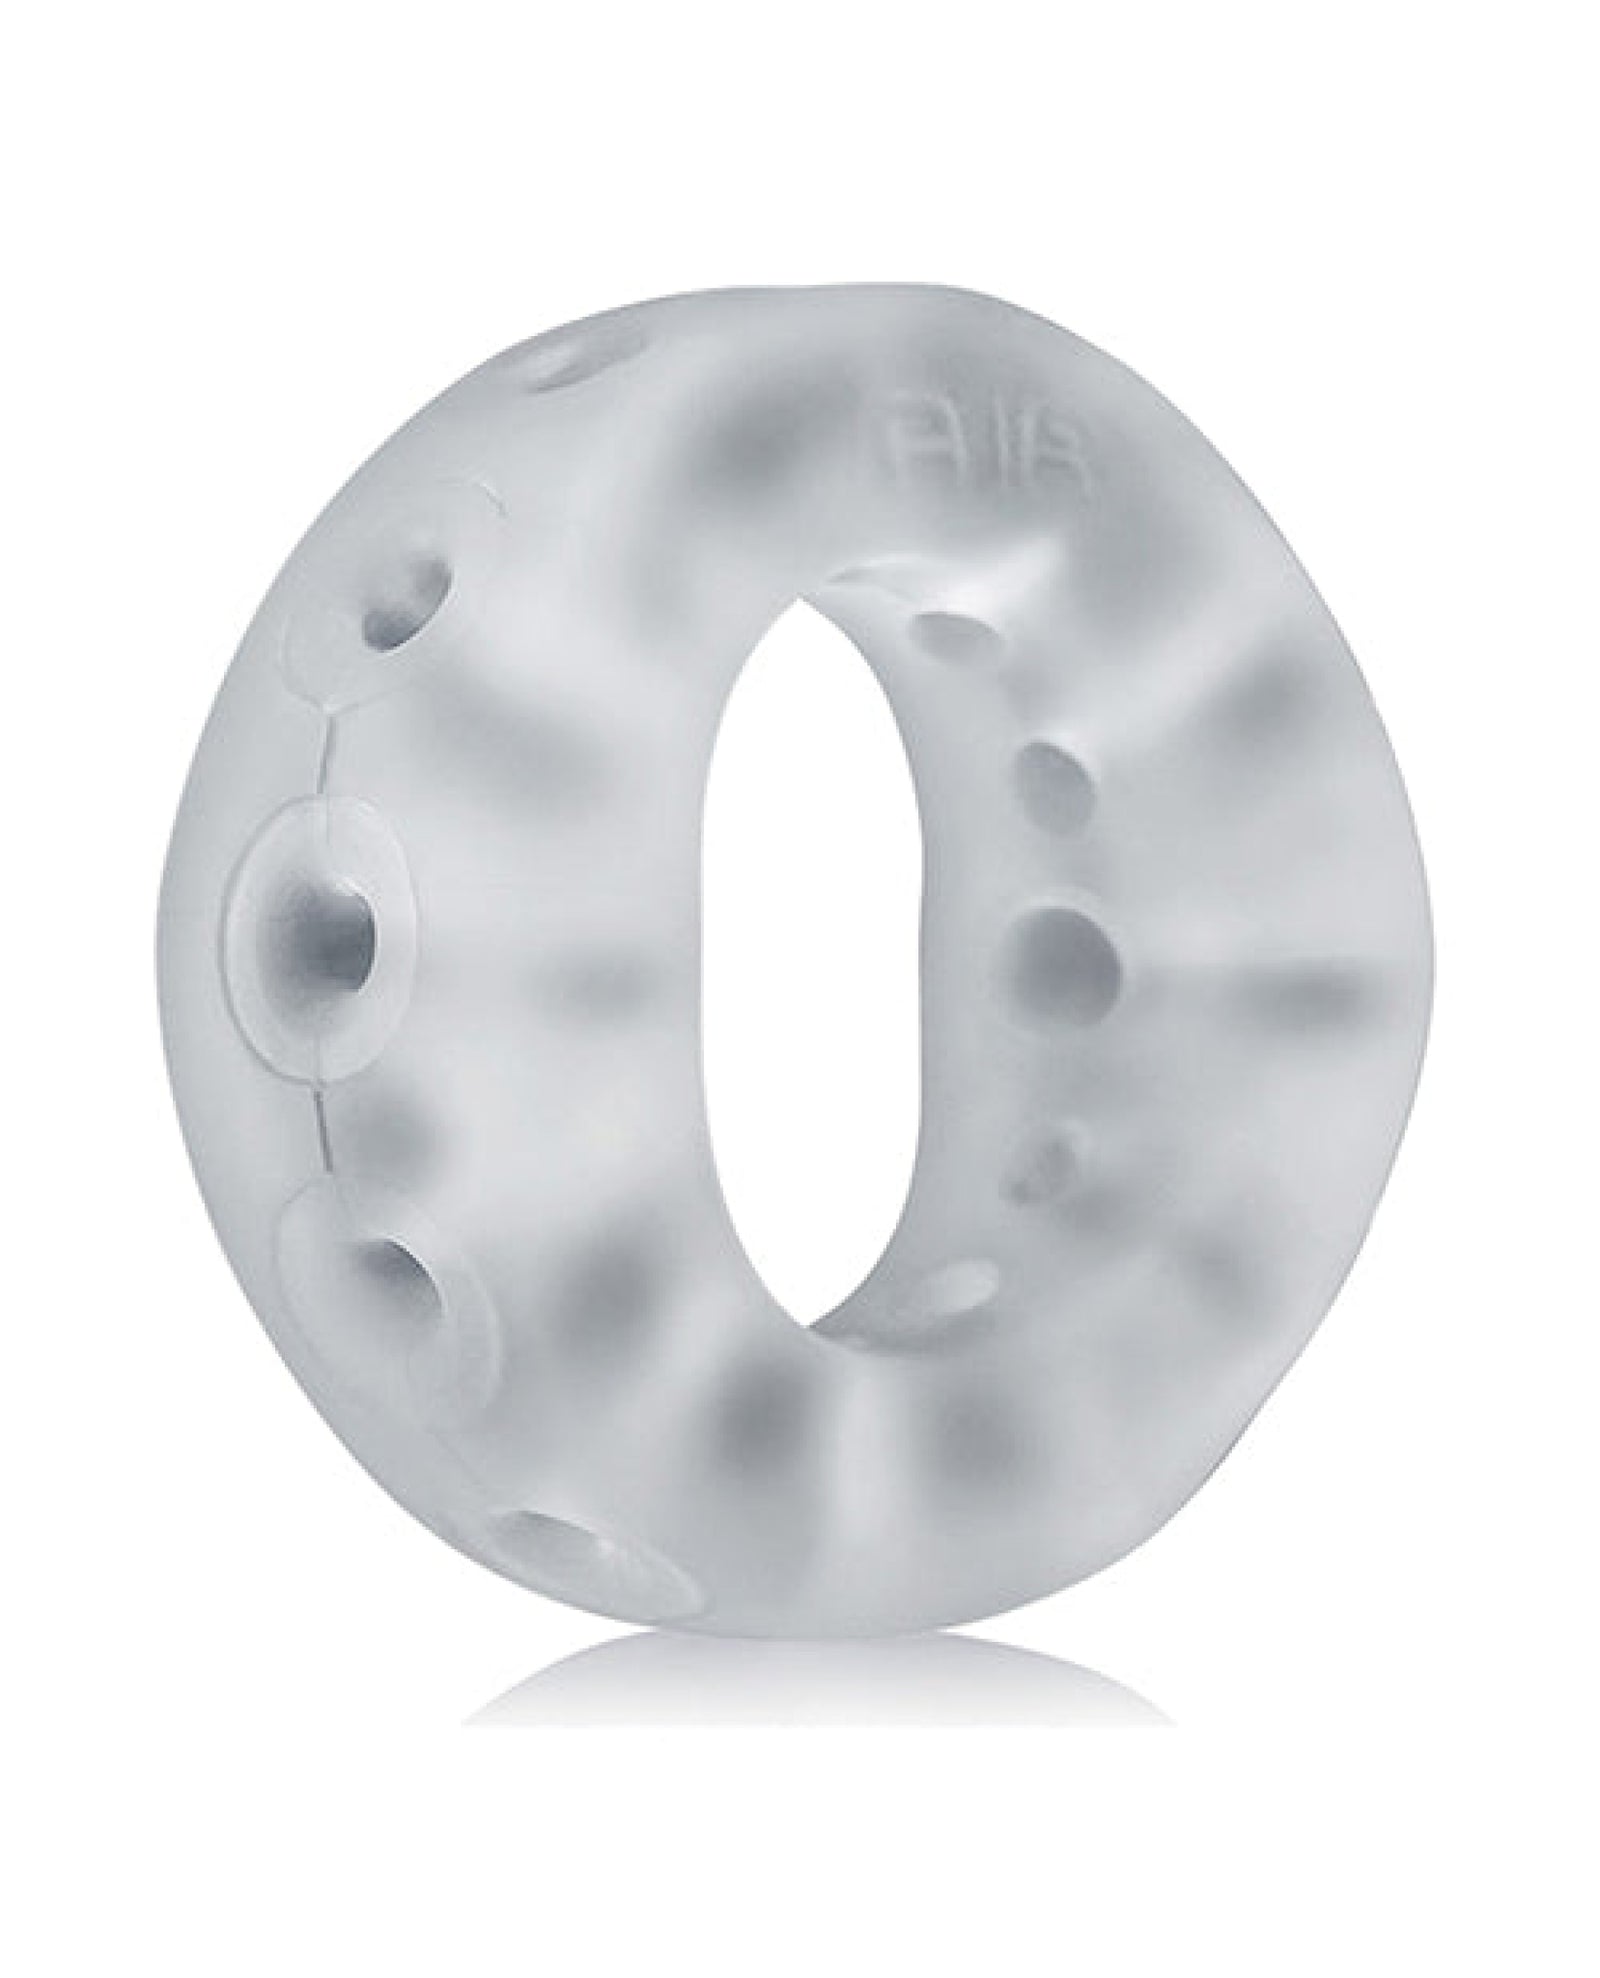 Oxballs Air Airflow Cockring - Cool Ice Hunky Junk